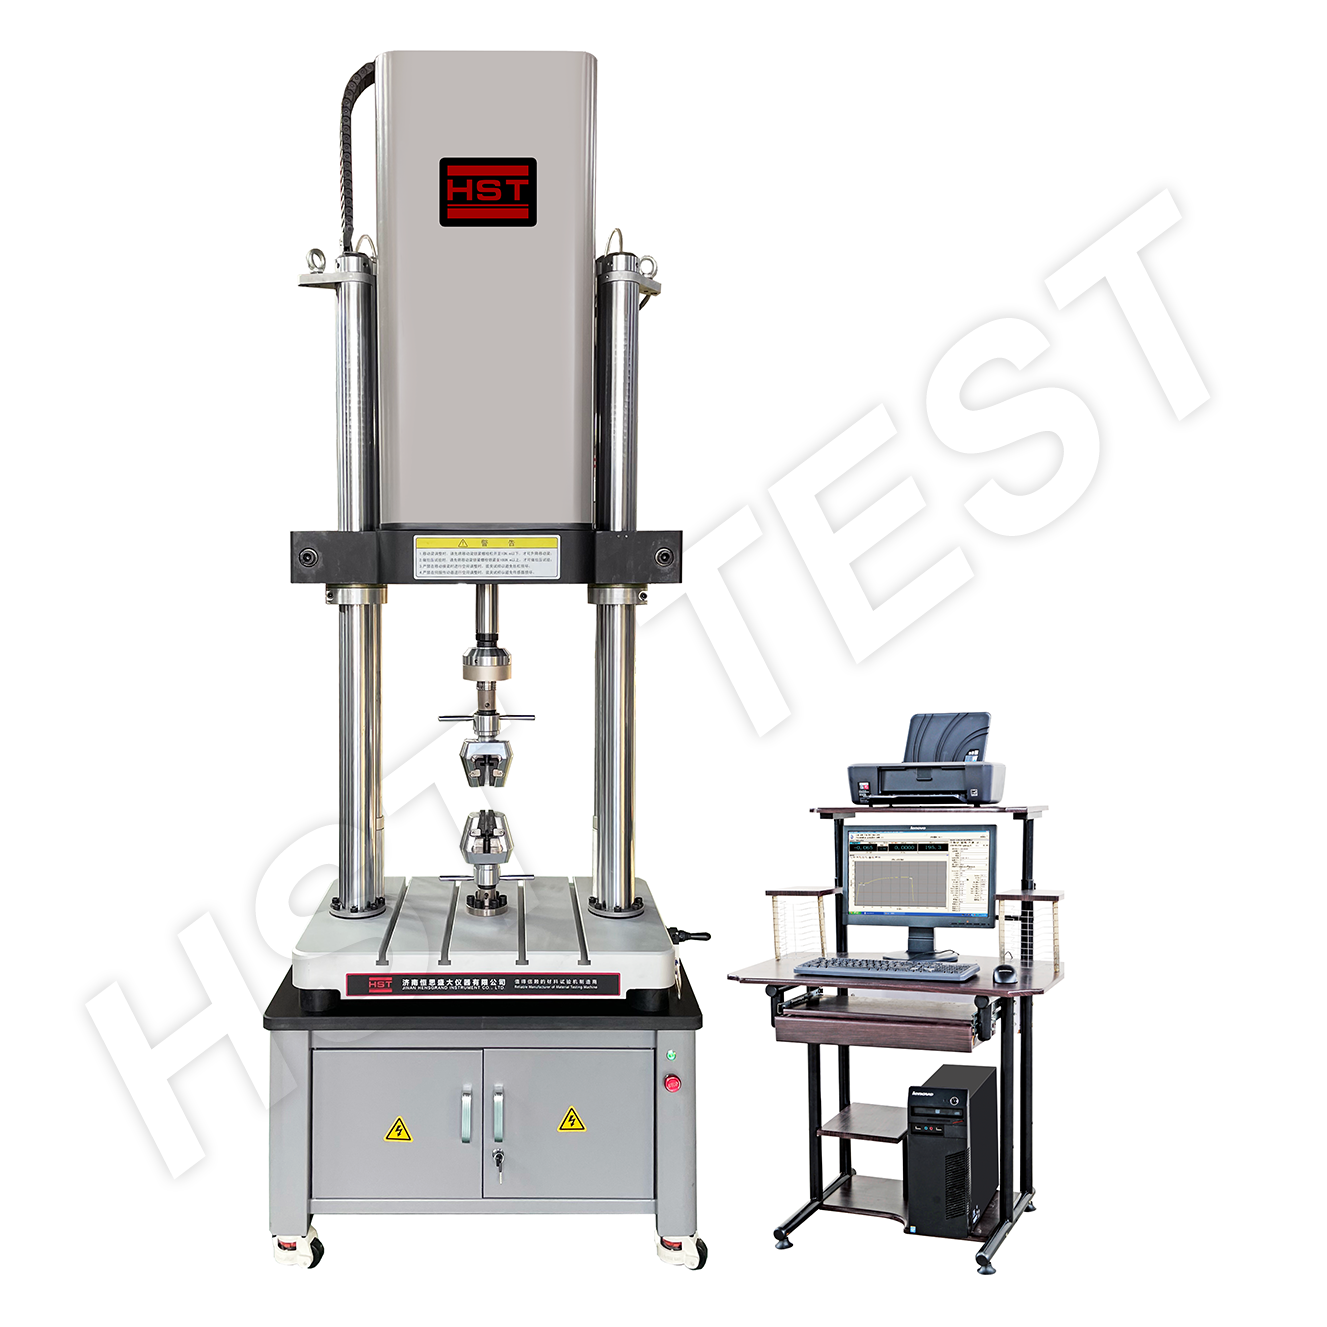 Spinal Implant Constructs fatigue testing machine with ASTM F1717 standard